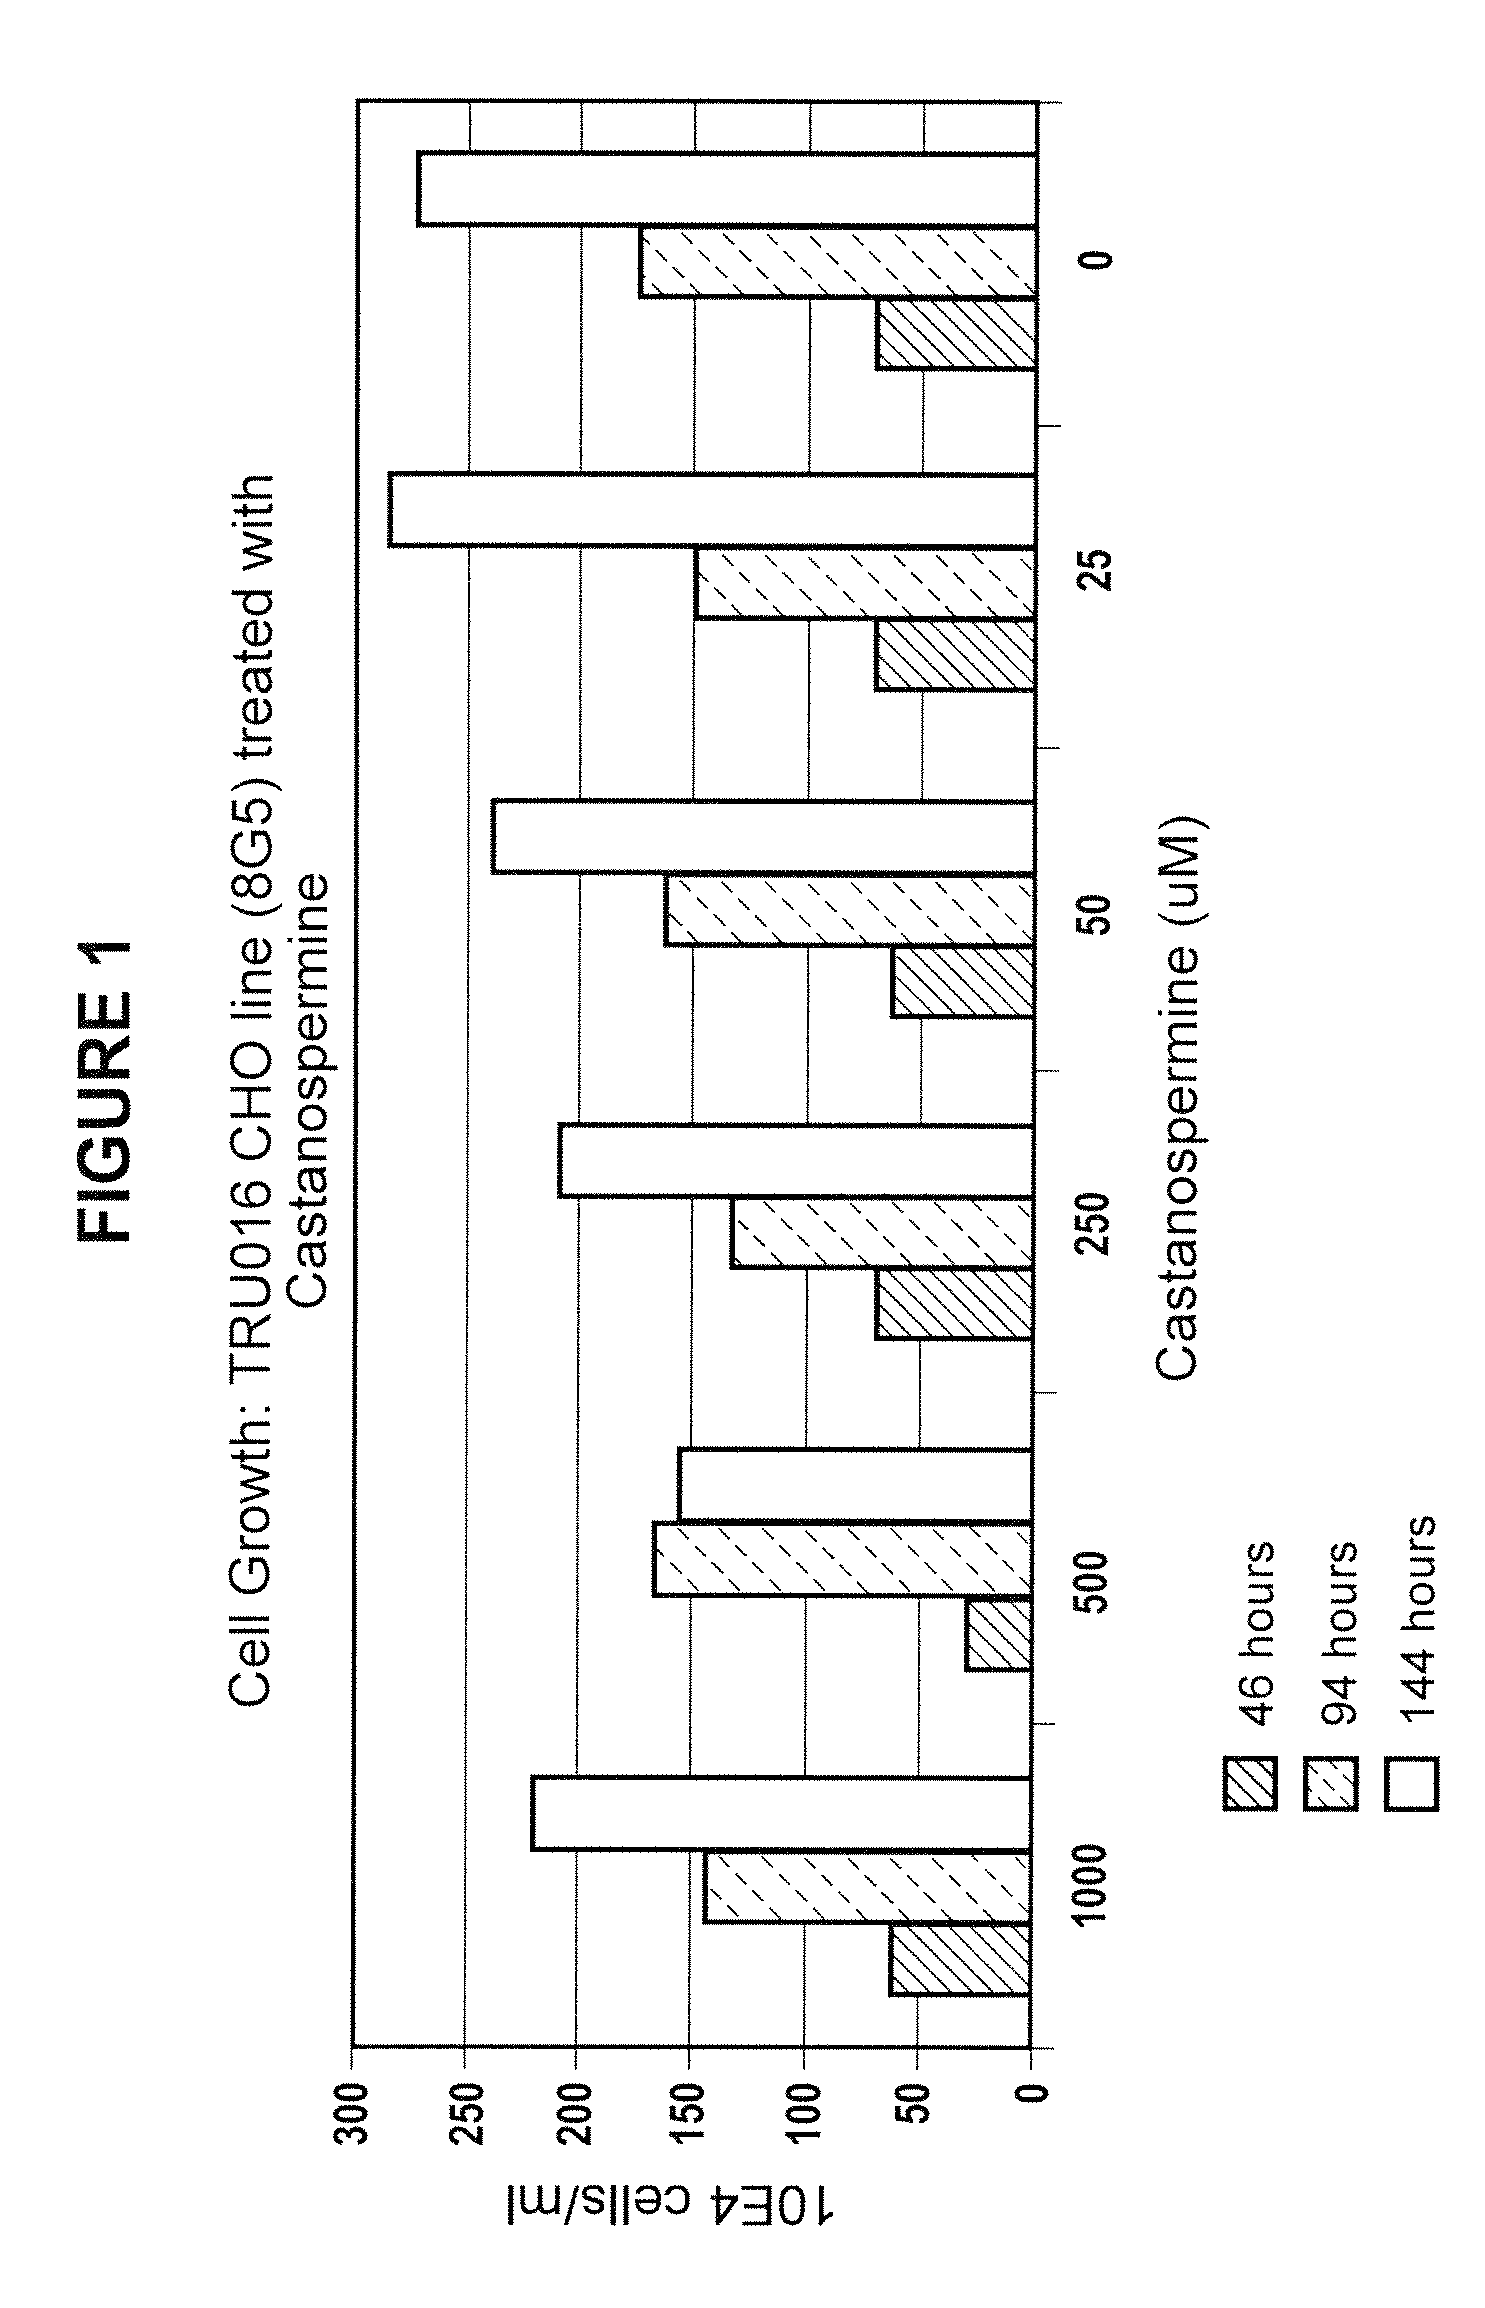 Materials and methods for improved immunoglycoproteins